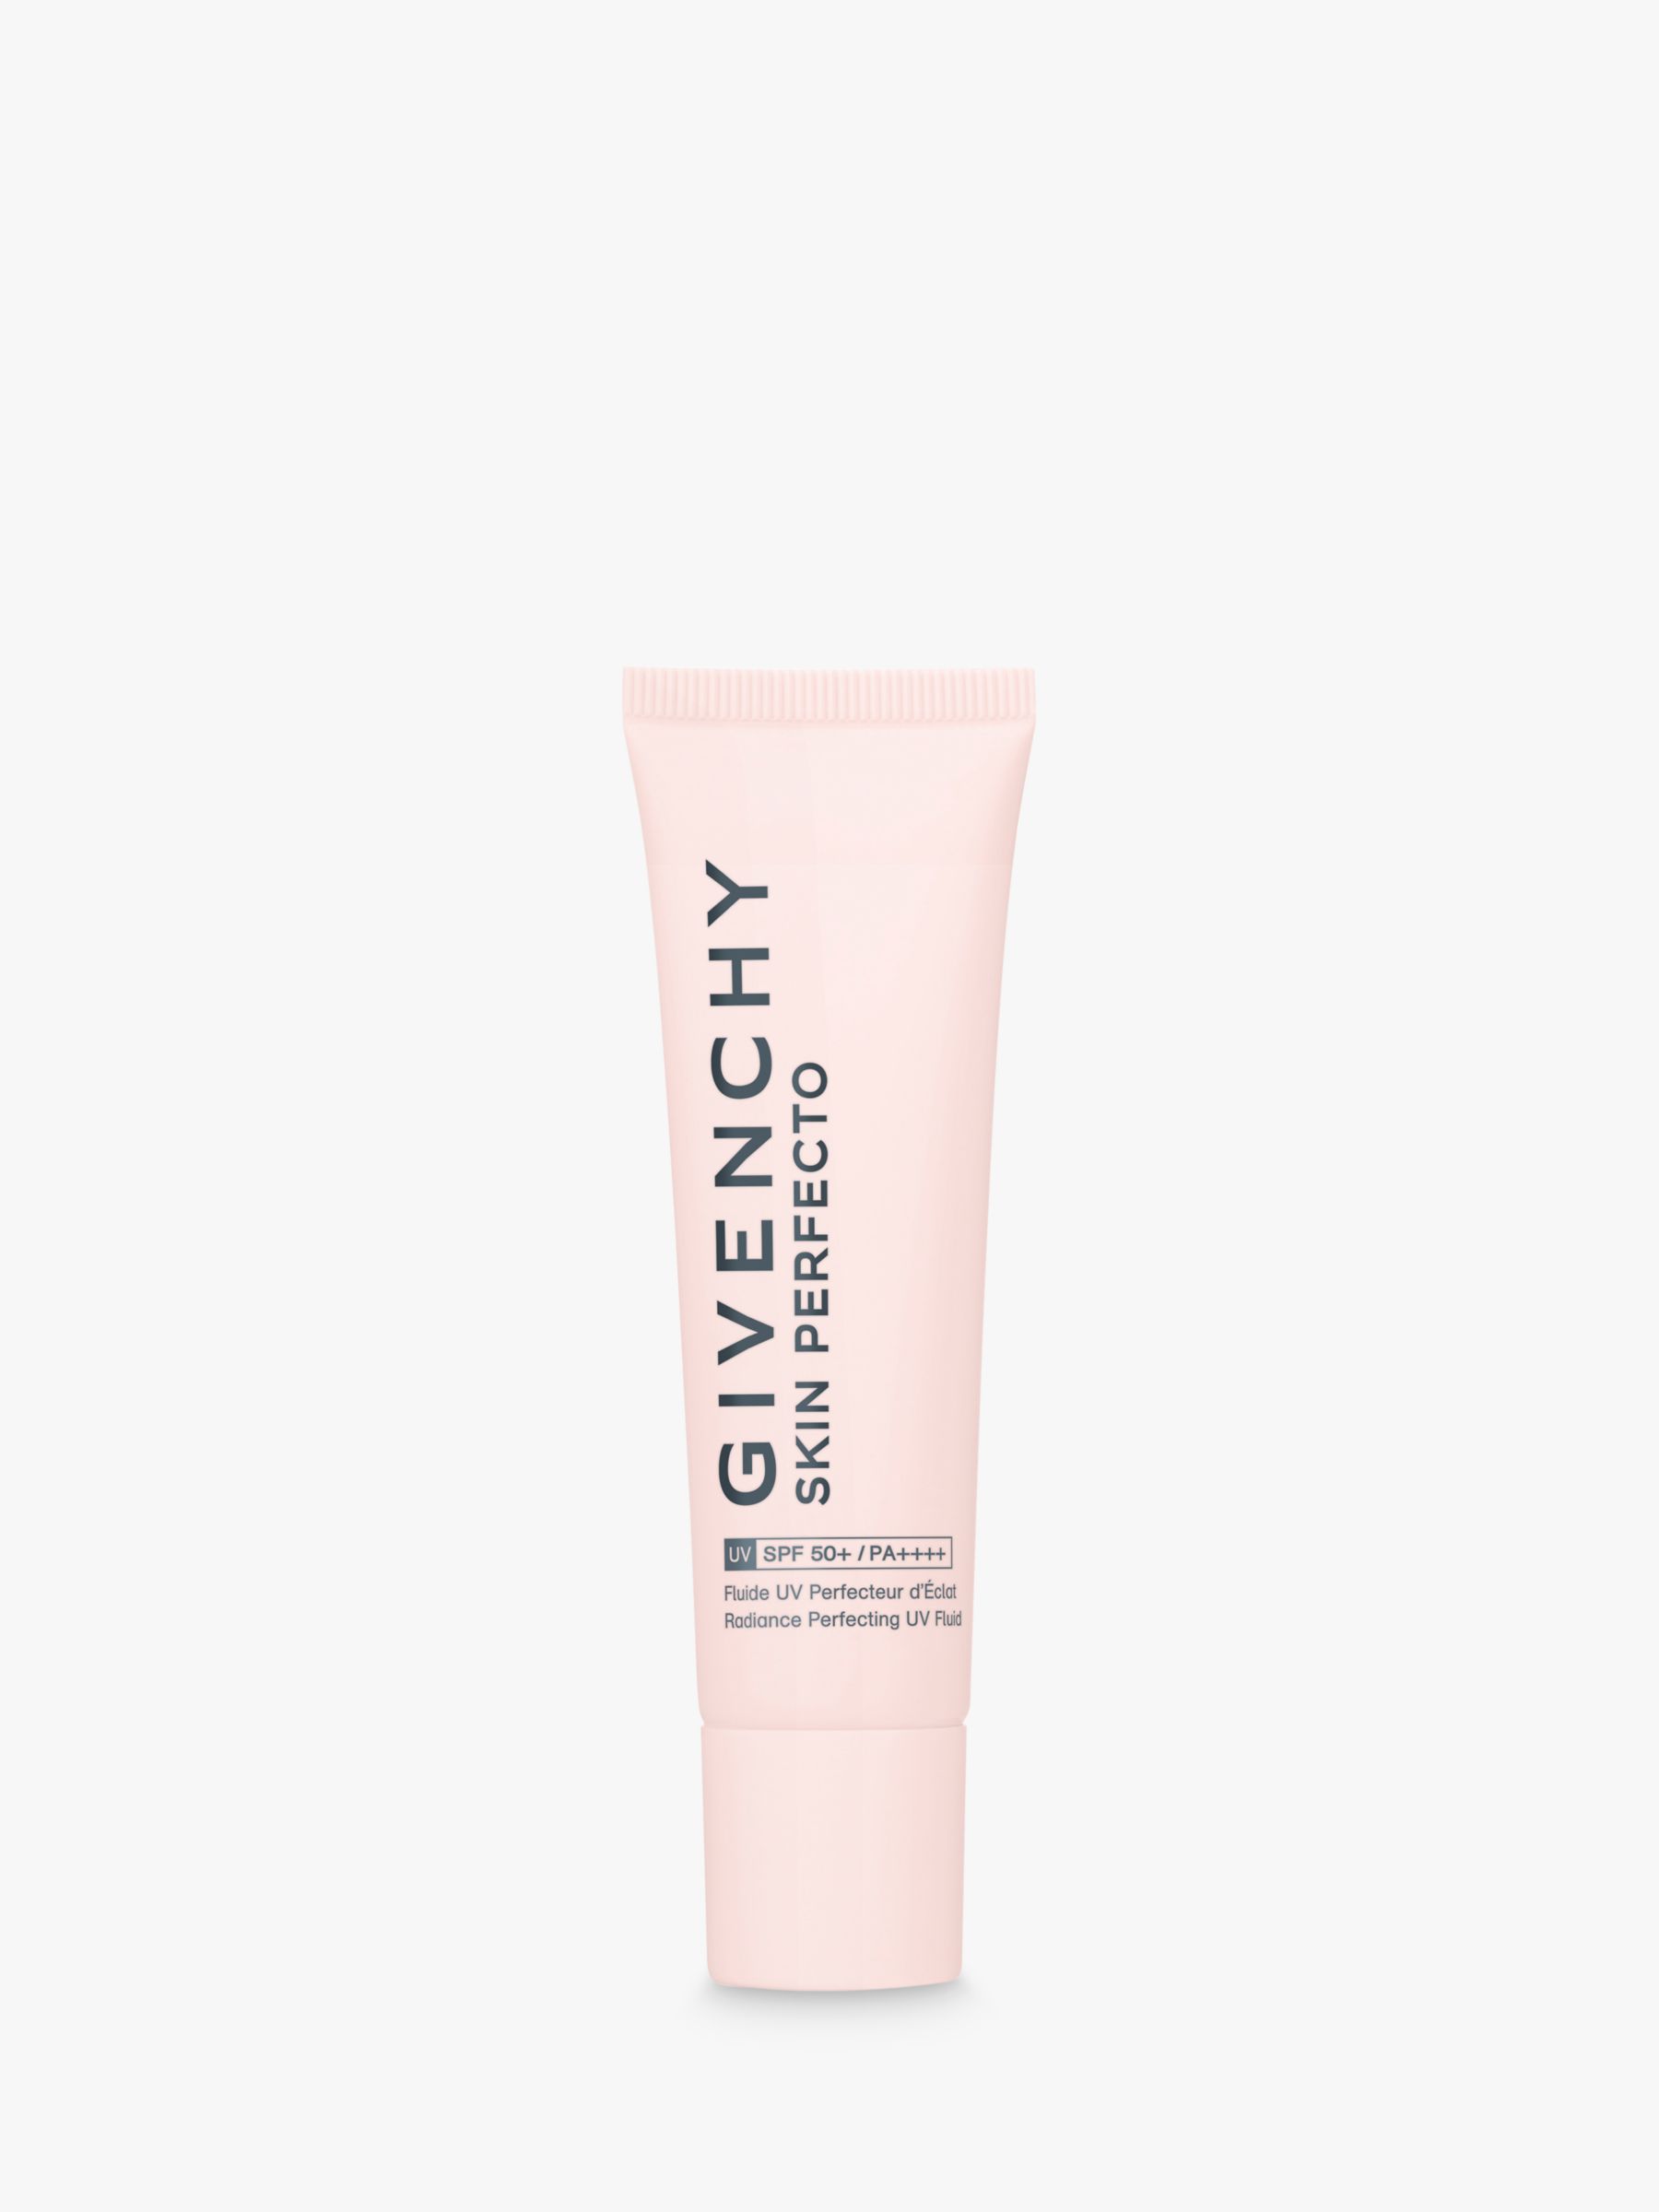 Givenchy Skin Perfecto Radiance Perfecting UV Fluid SPF 50+ PA++++, 30ml 1